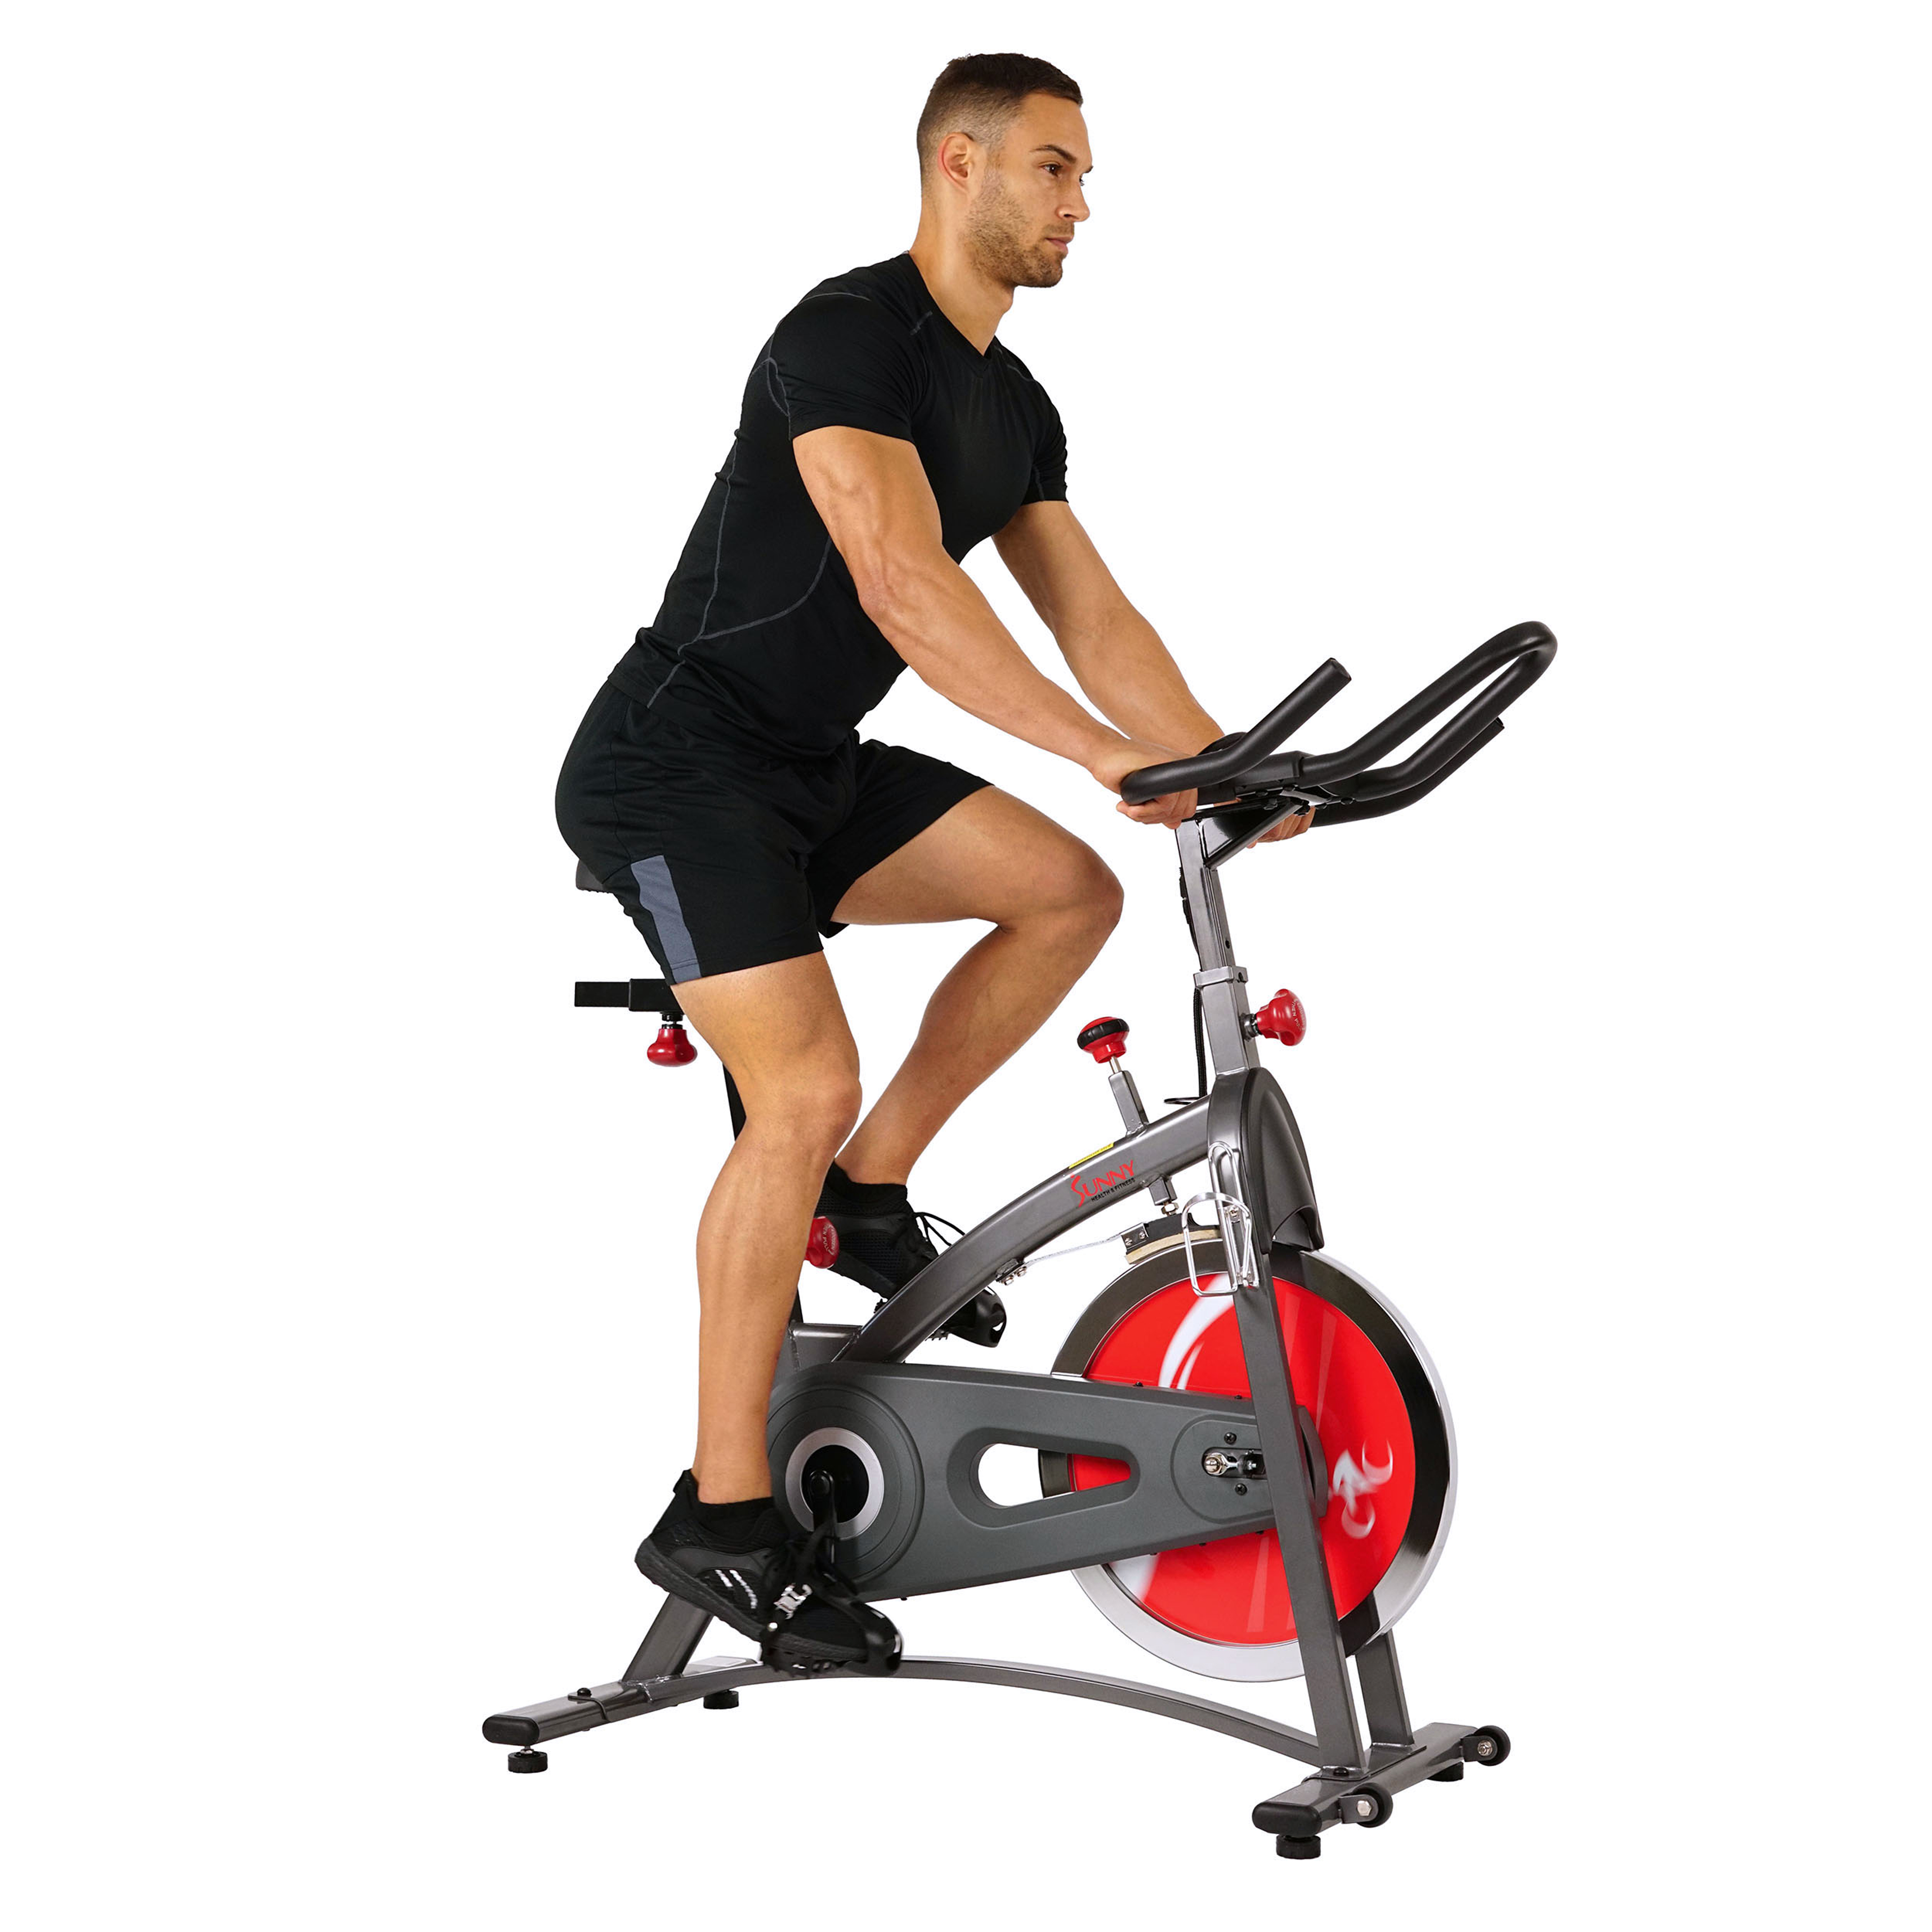 Sunny Health & Fitness SF-B1423 Belt Drive Indoor Cycling Bike Exercise Bike w/ LCD Monitor - image 3 of 7